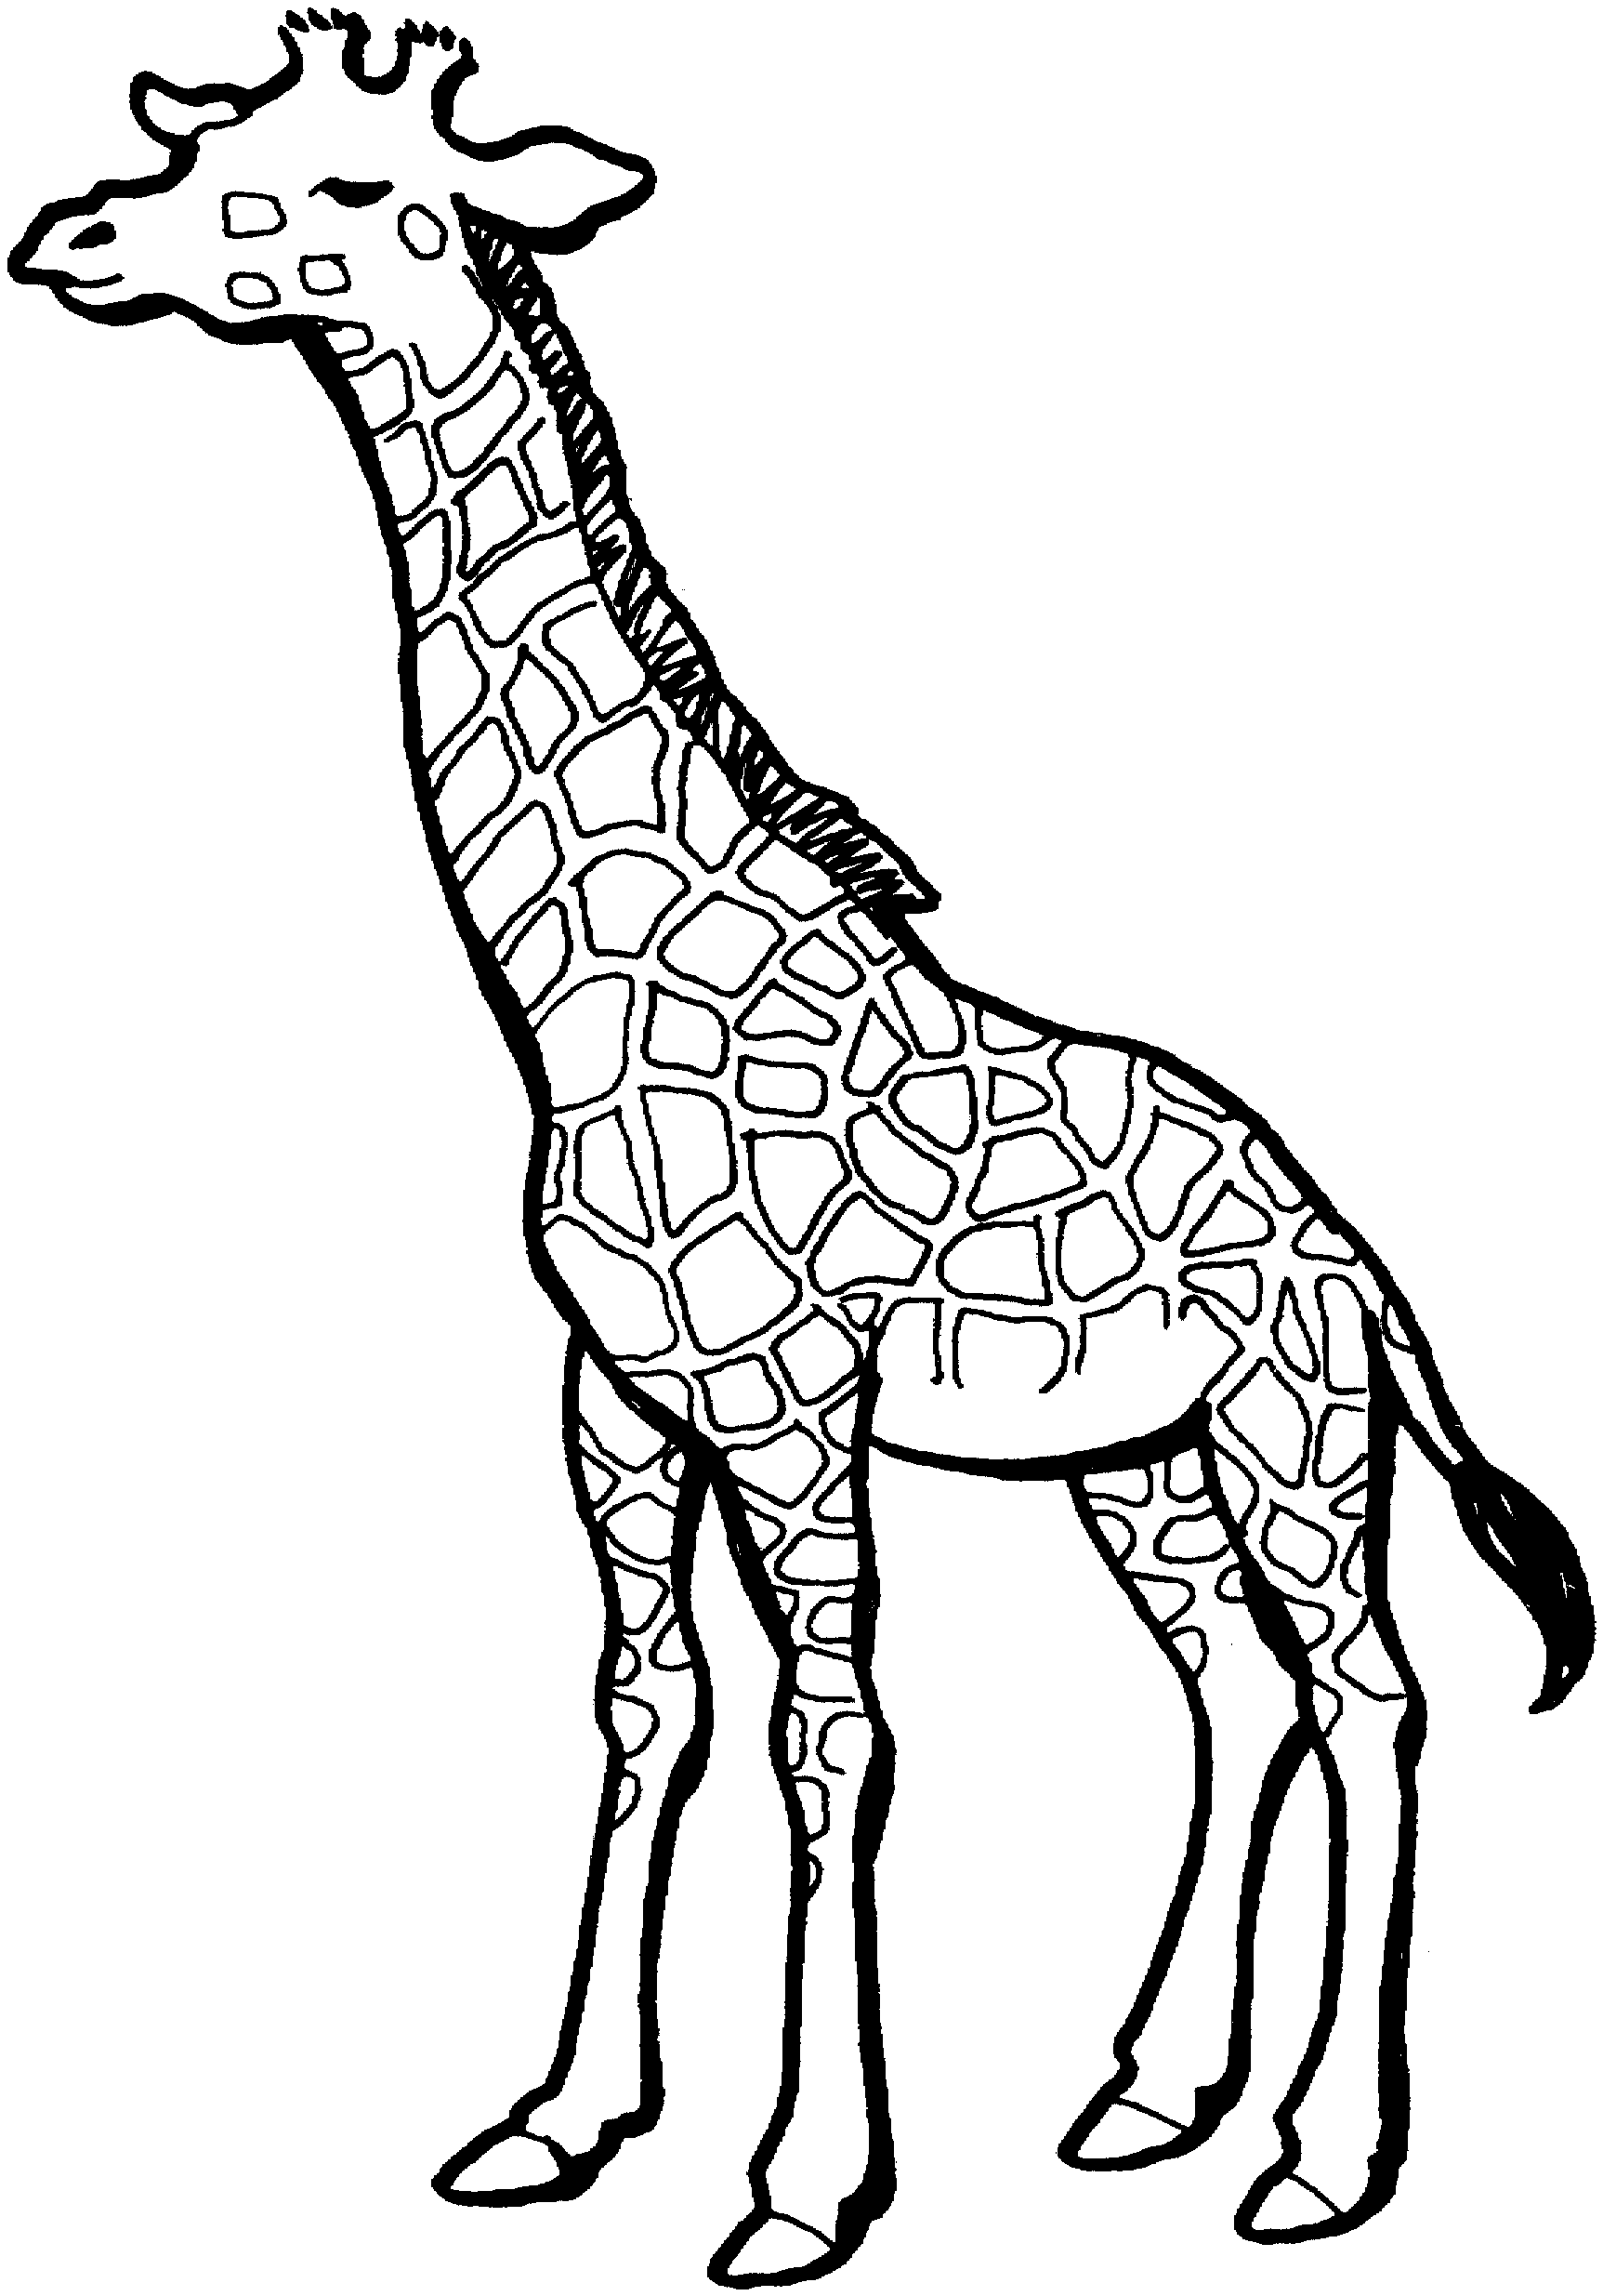 Black and White Giraffe Coloring Pages giraffe black and Printable Coloring4free